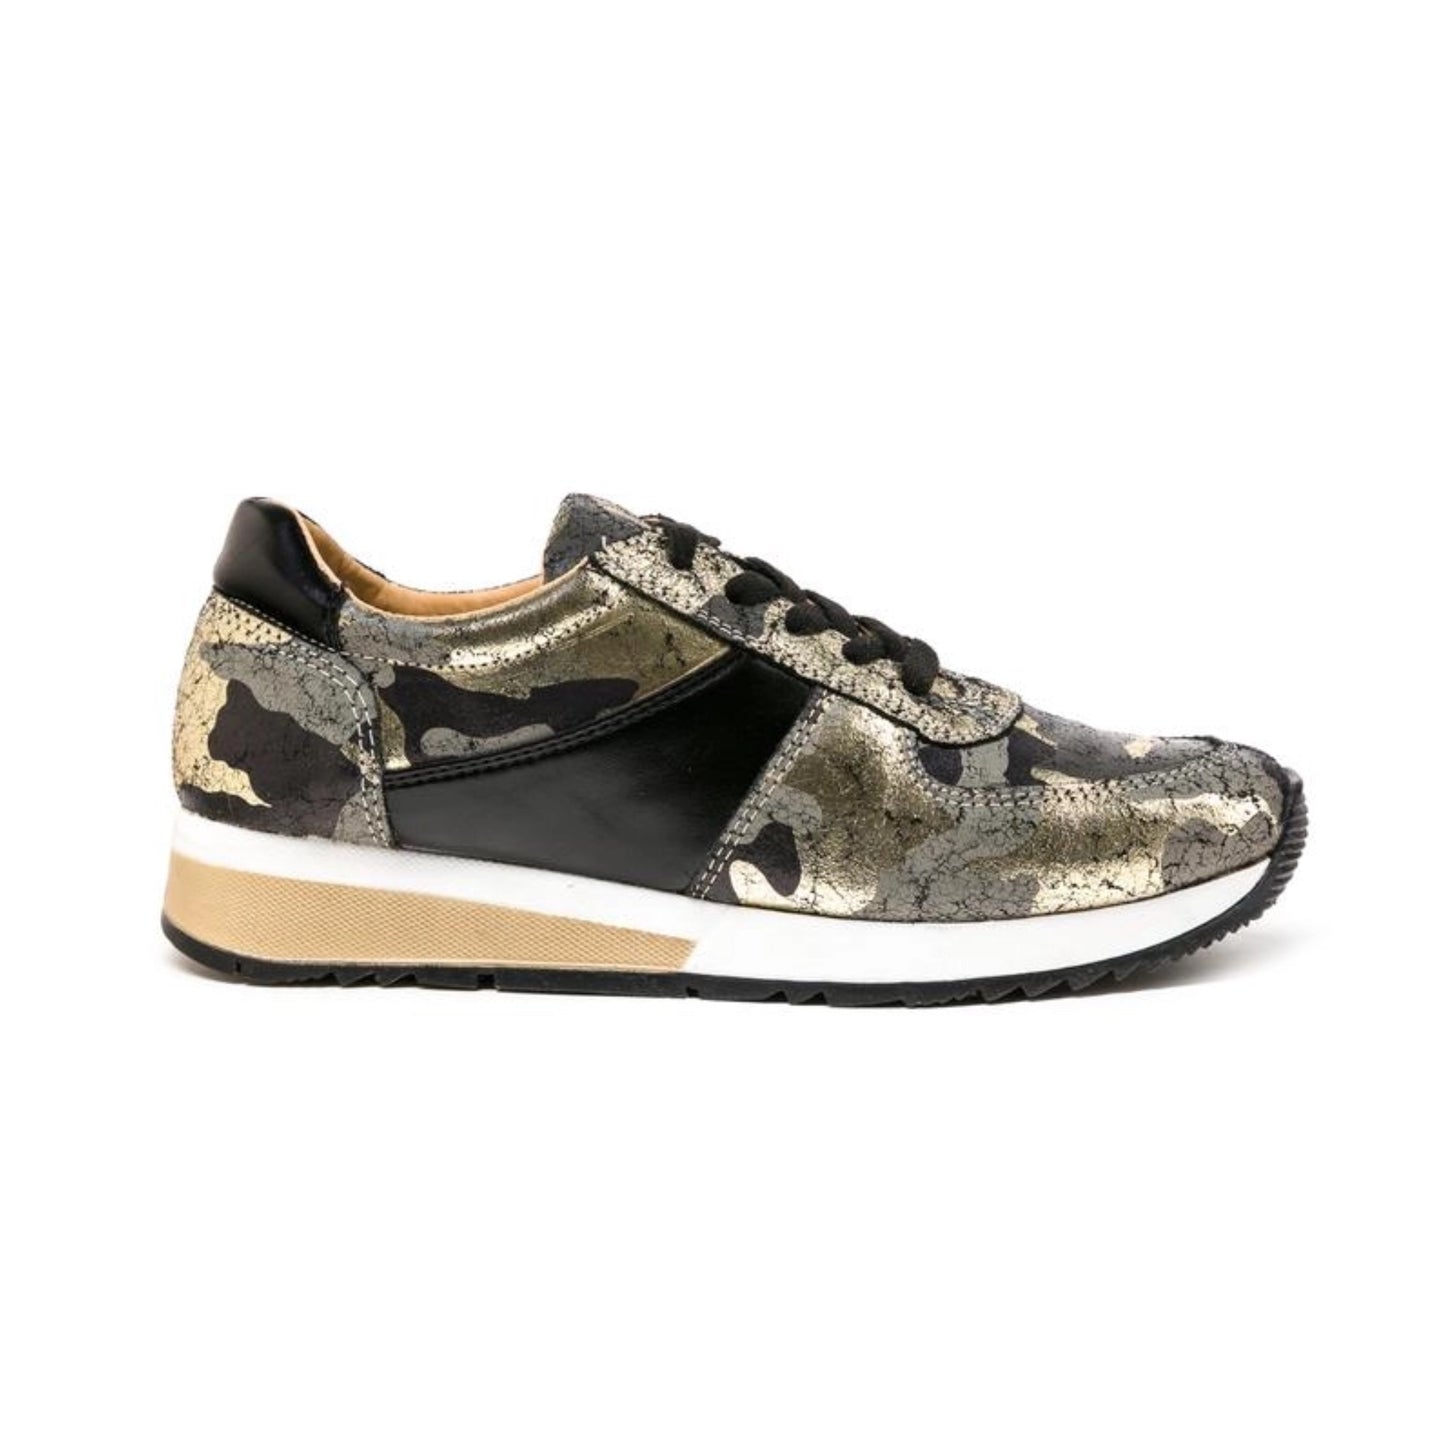 Black & Gold Camouflage Sneakers